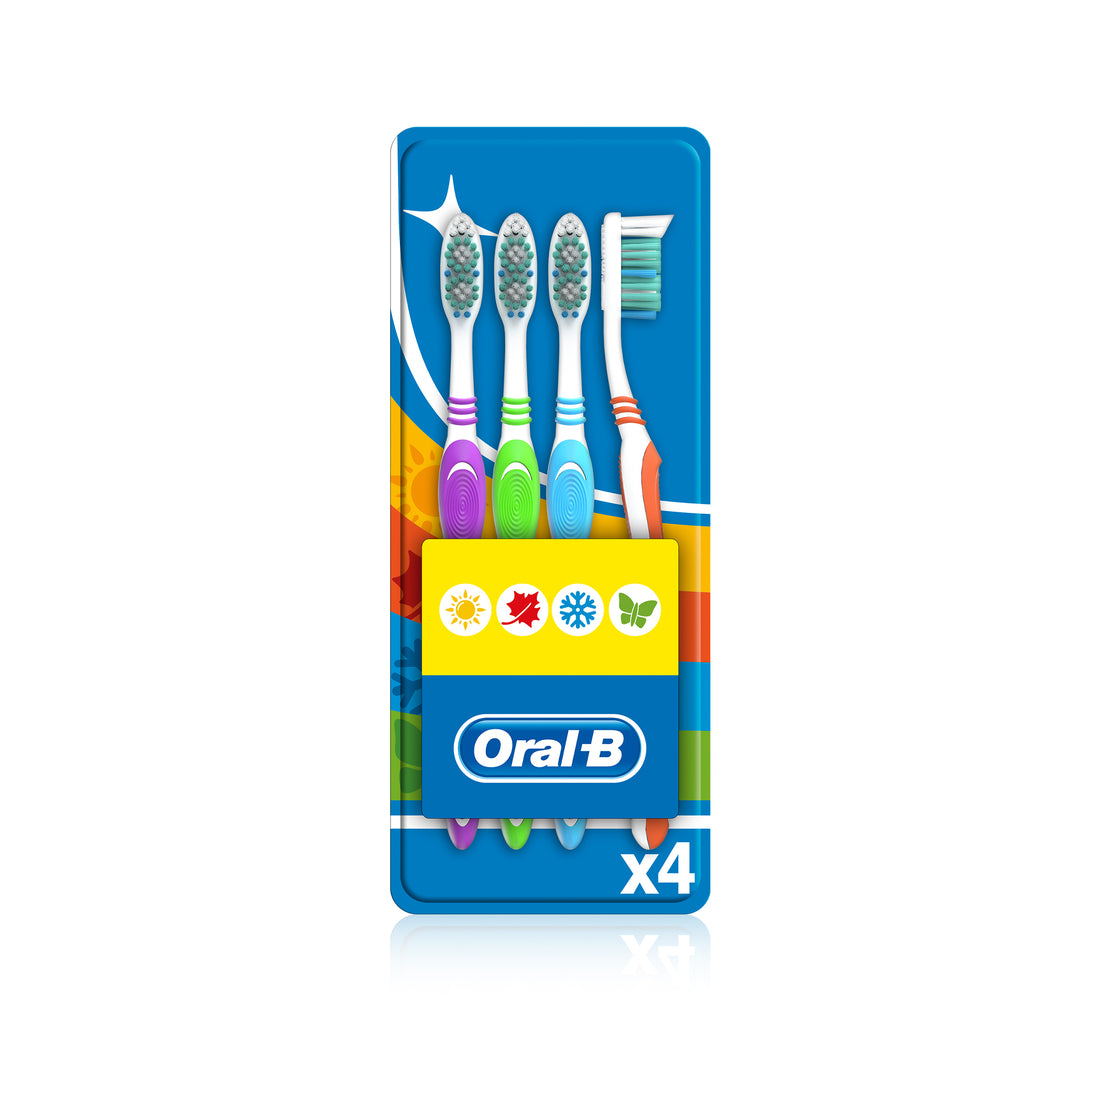 Oral-B 123 Toothbrush Shiny Clean 4 Un